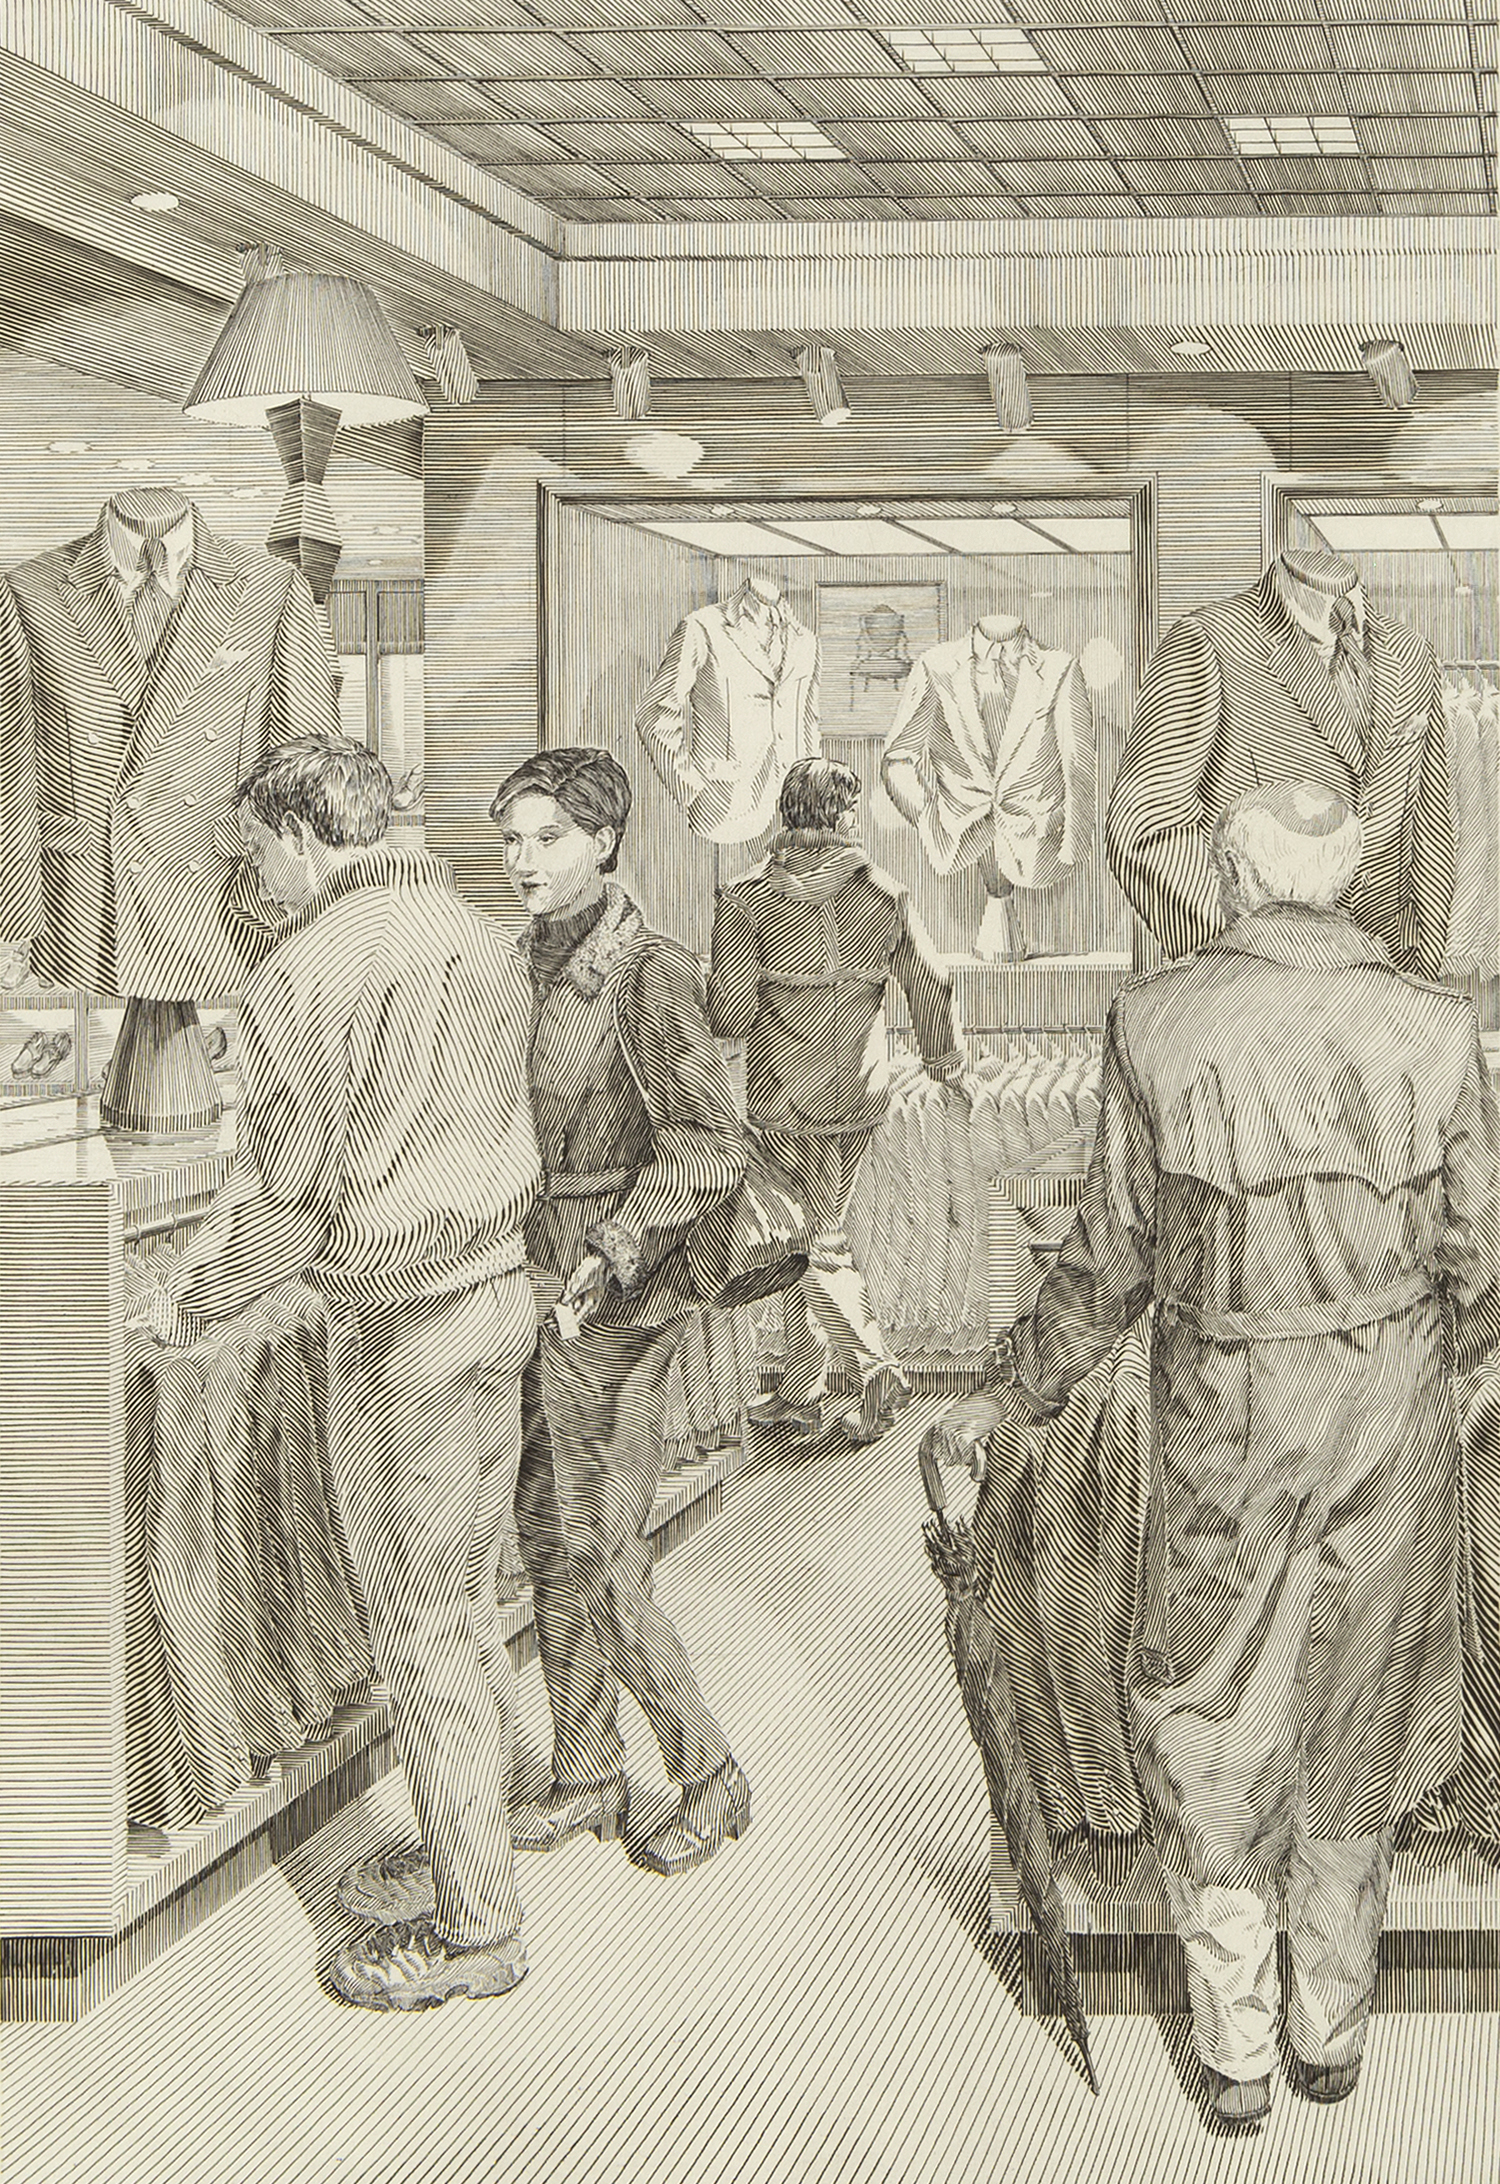 Suit Shopping An Engraved Narrative 1